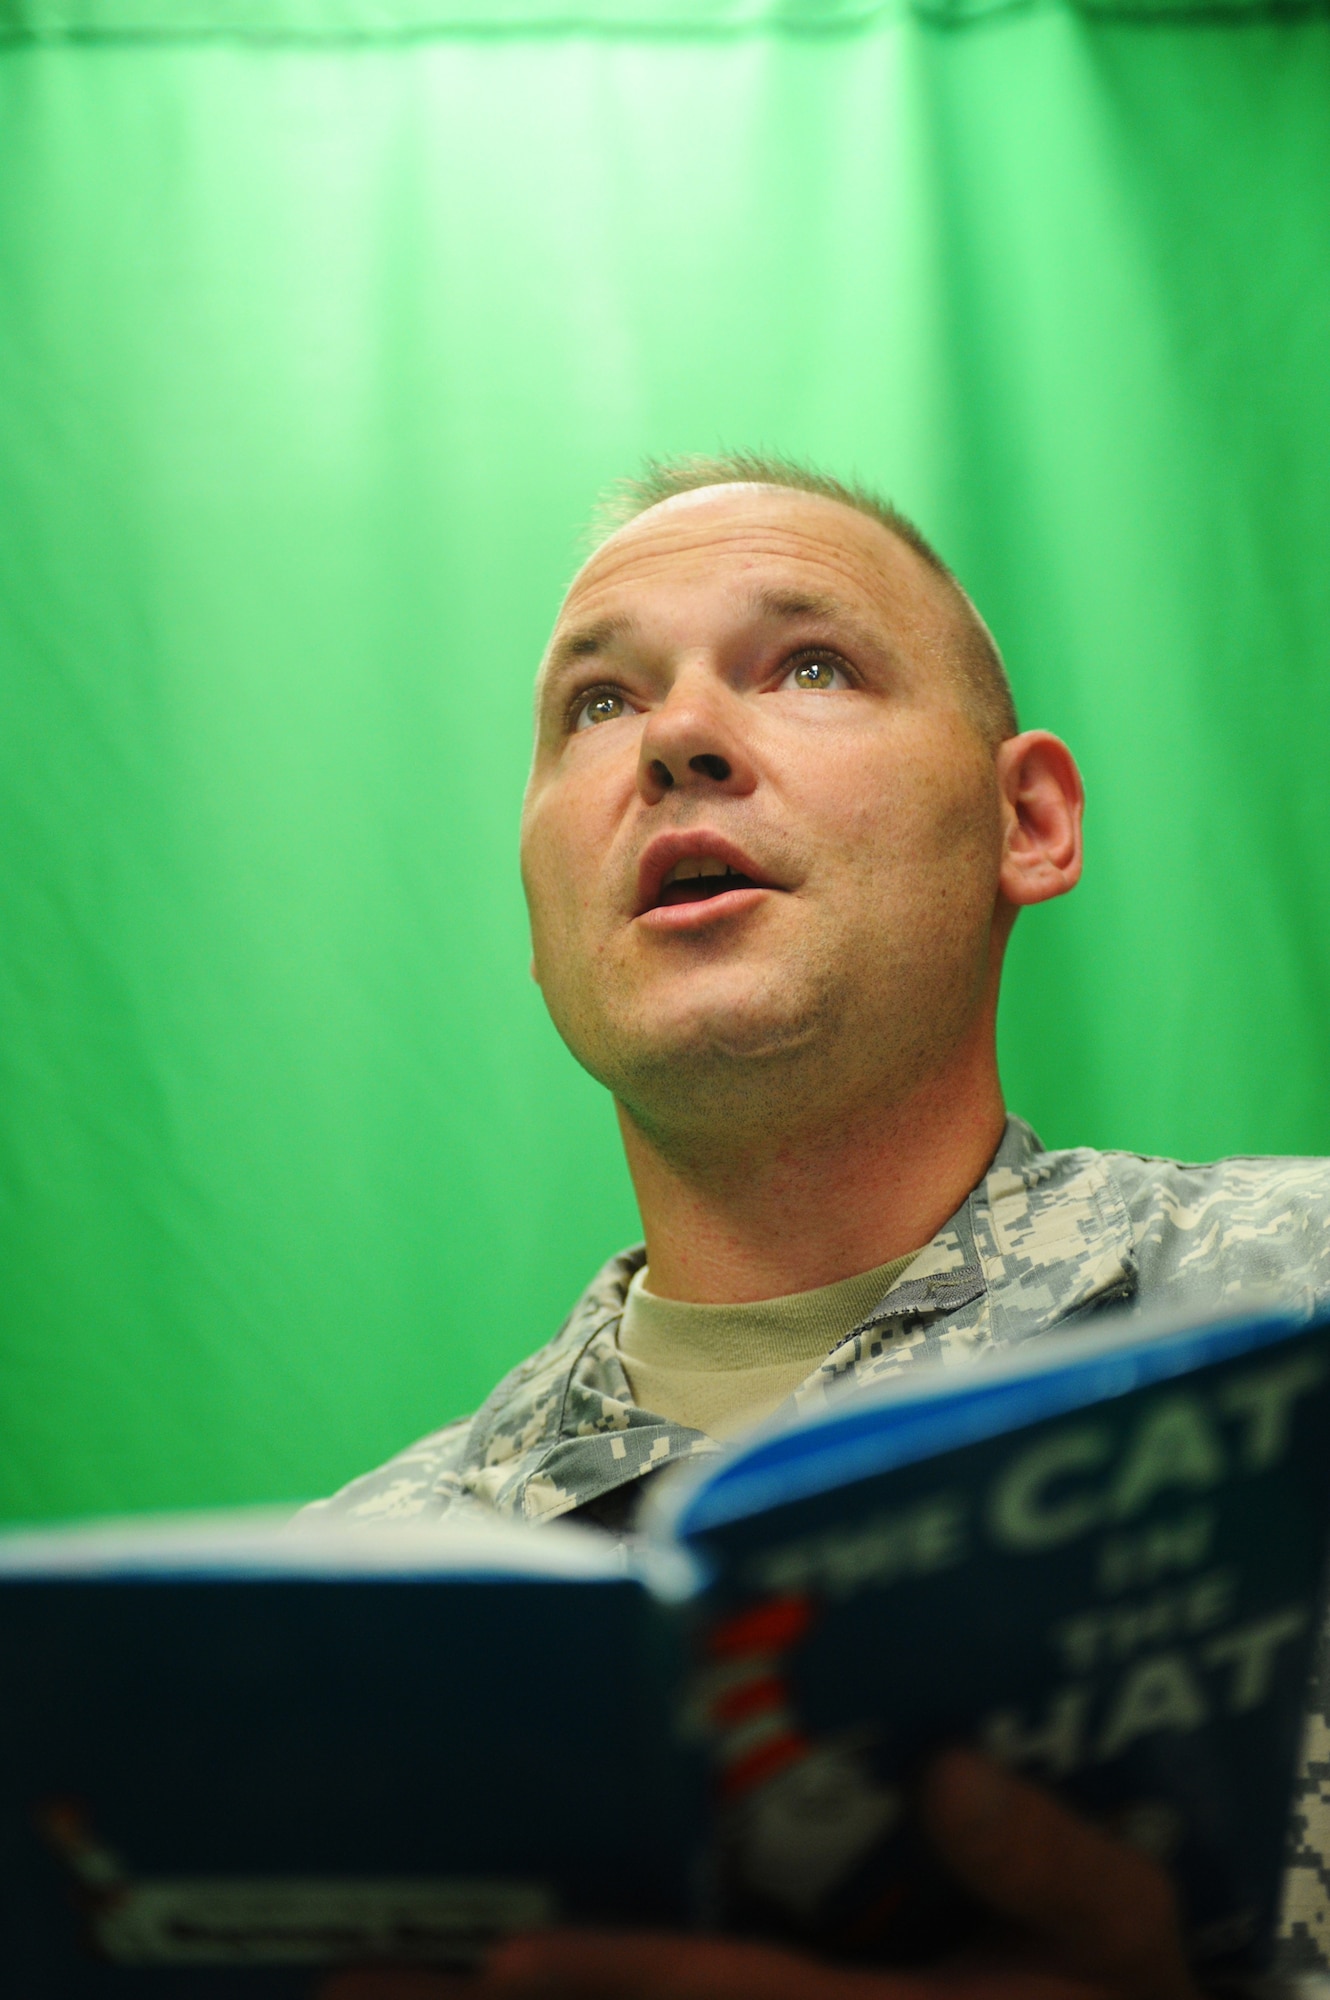 Army Sgt. 1st Class Maynard Hinkle, Task Force Saber, 6th Squadron, 17th Calvary, reads The Cat in the Hat July 16, 2008 at Fort Wainwright. Sergeant Hinkle has been on many deployments, including Afghanistan and Bosnia and has never, until now, had the capability to communicate via video recording to his children. (U.S. Air Force photo by Airman 1st Class Jonathan Snyder)